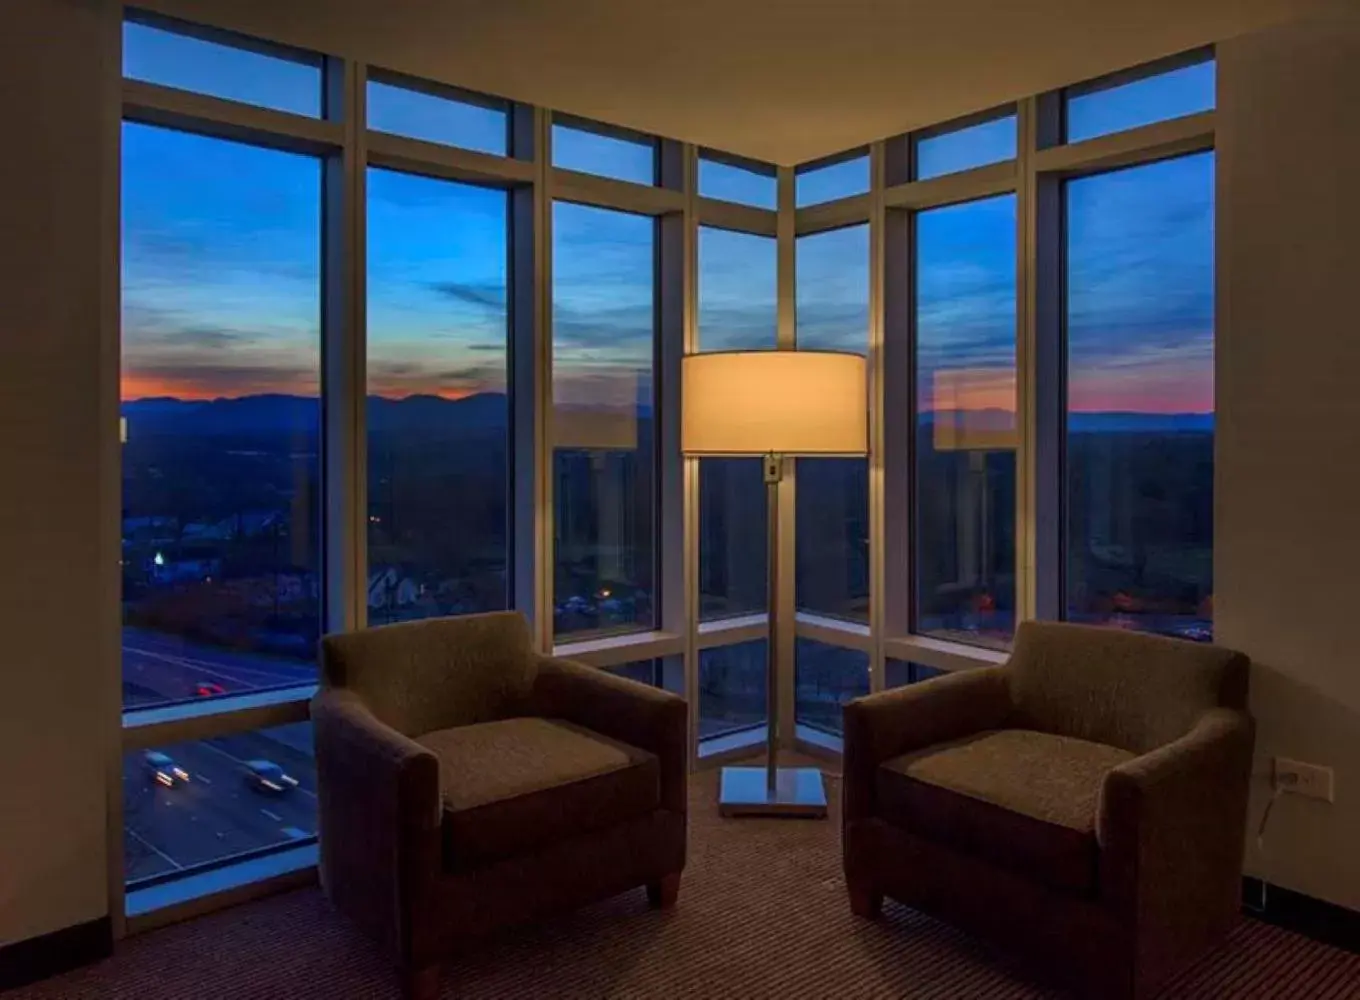 Natural landscape, Sunrise/Sunset in DoubleTree by Hilton Asheville Downtown